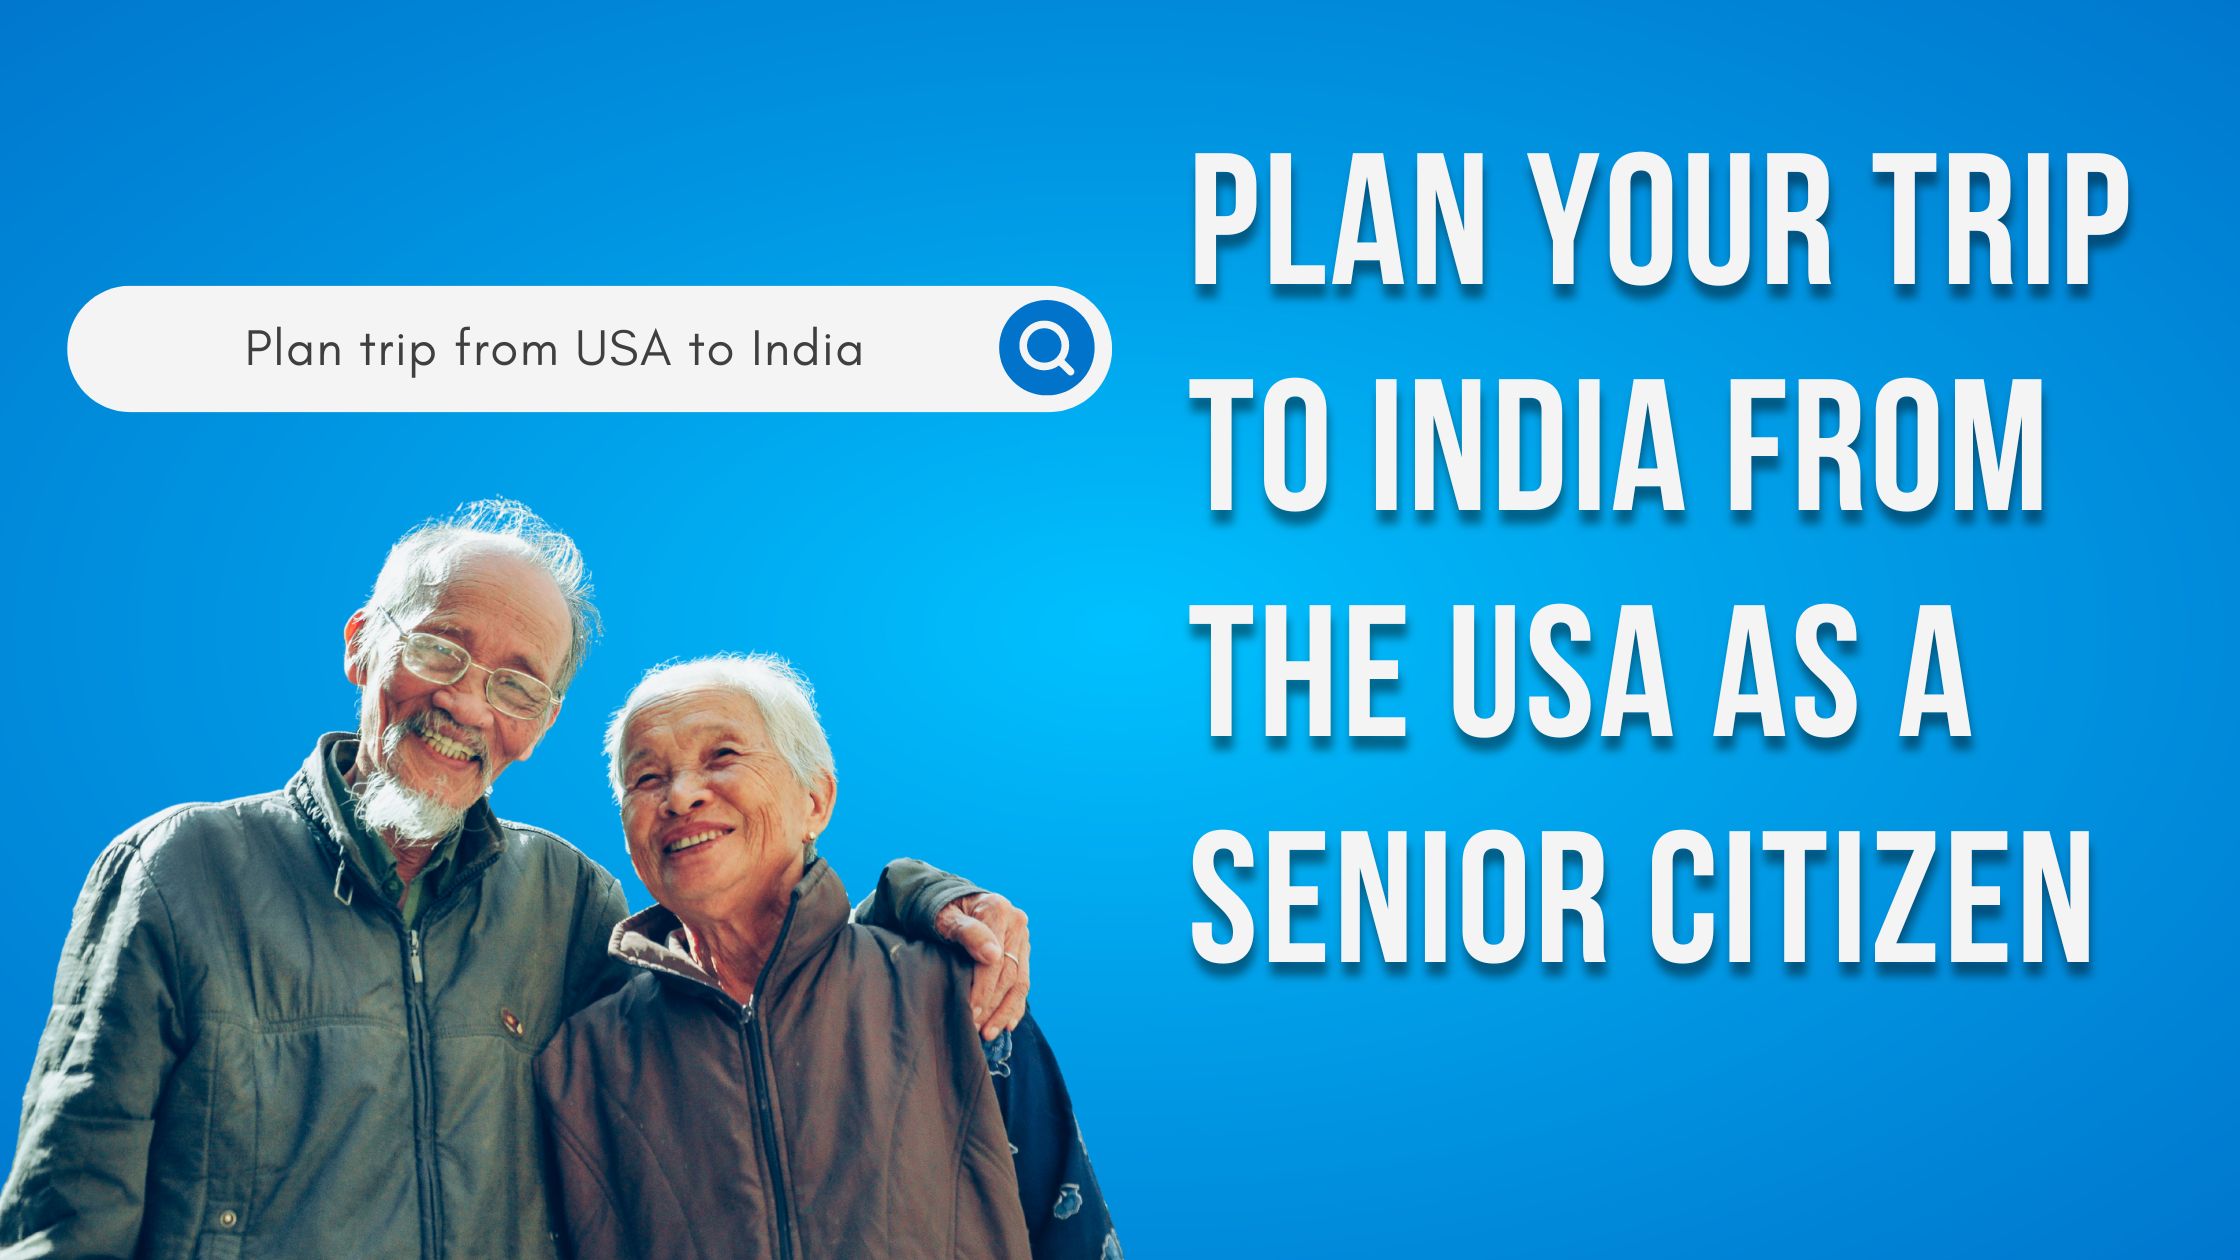 How to Plan Your Trip to India from the USA as a Senior Citizen